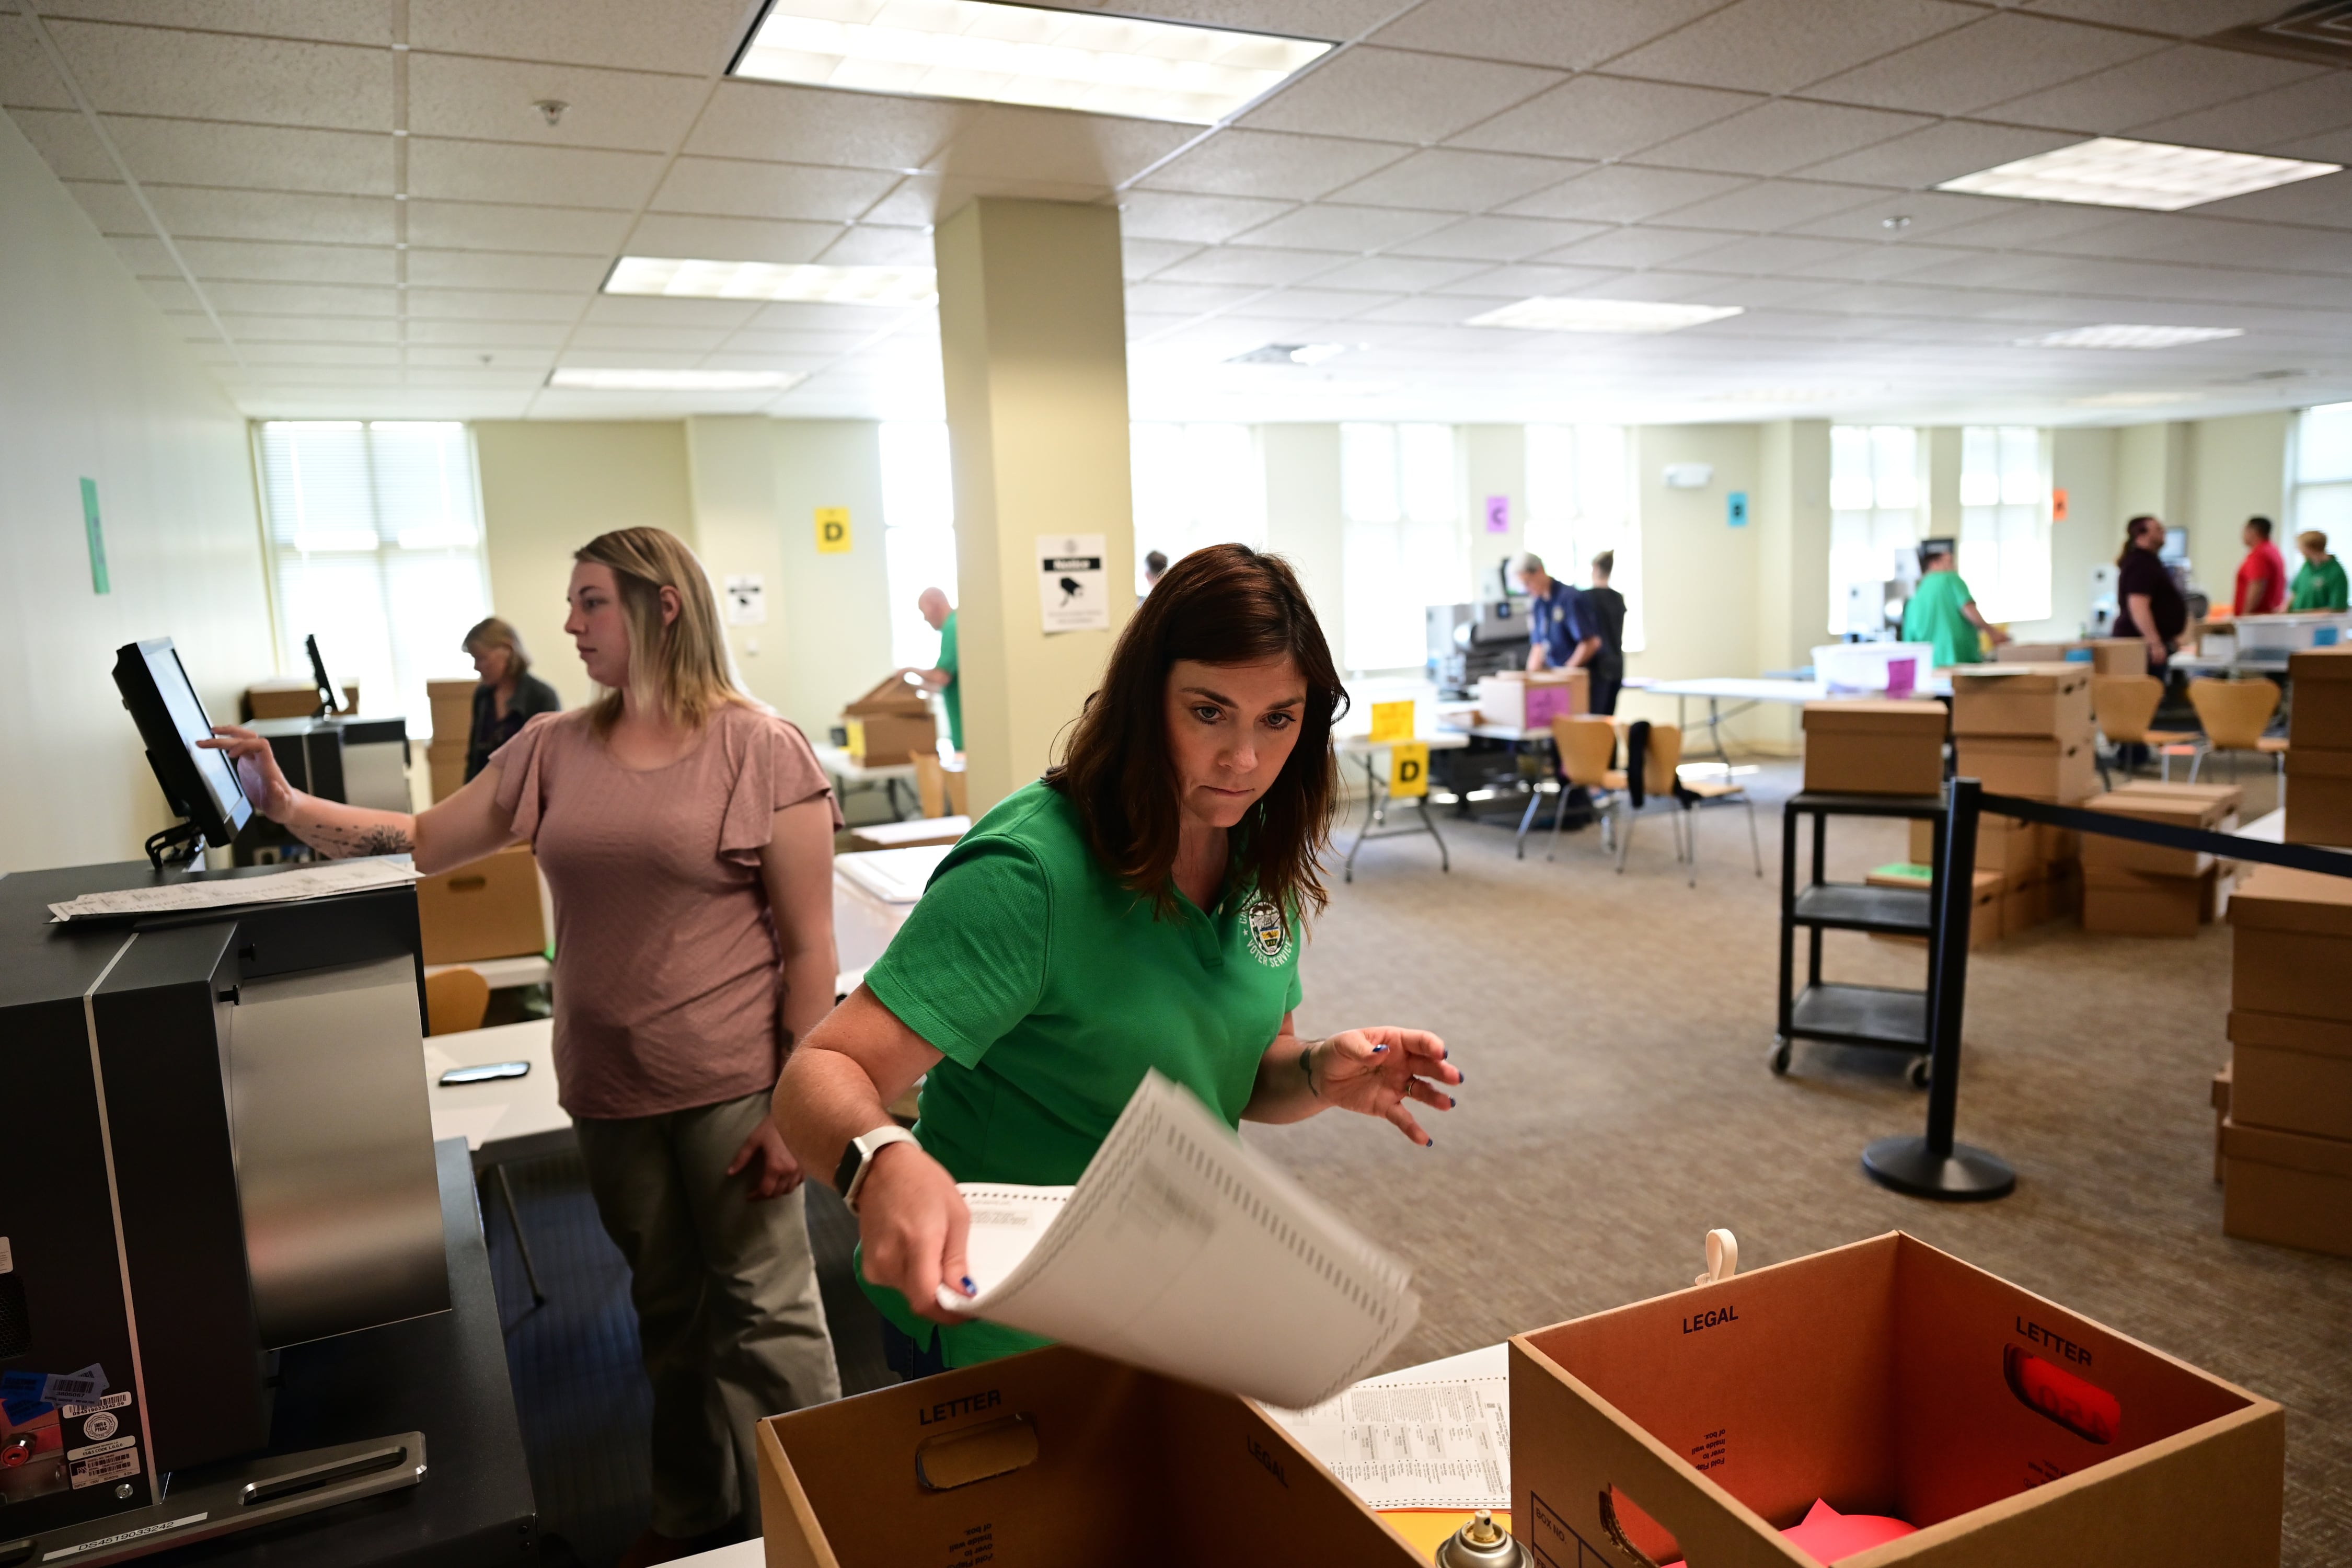 A woman places ballots into a box in a room full of workers 